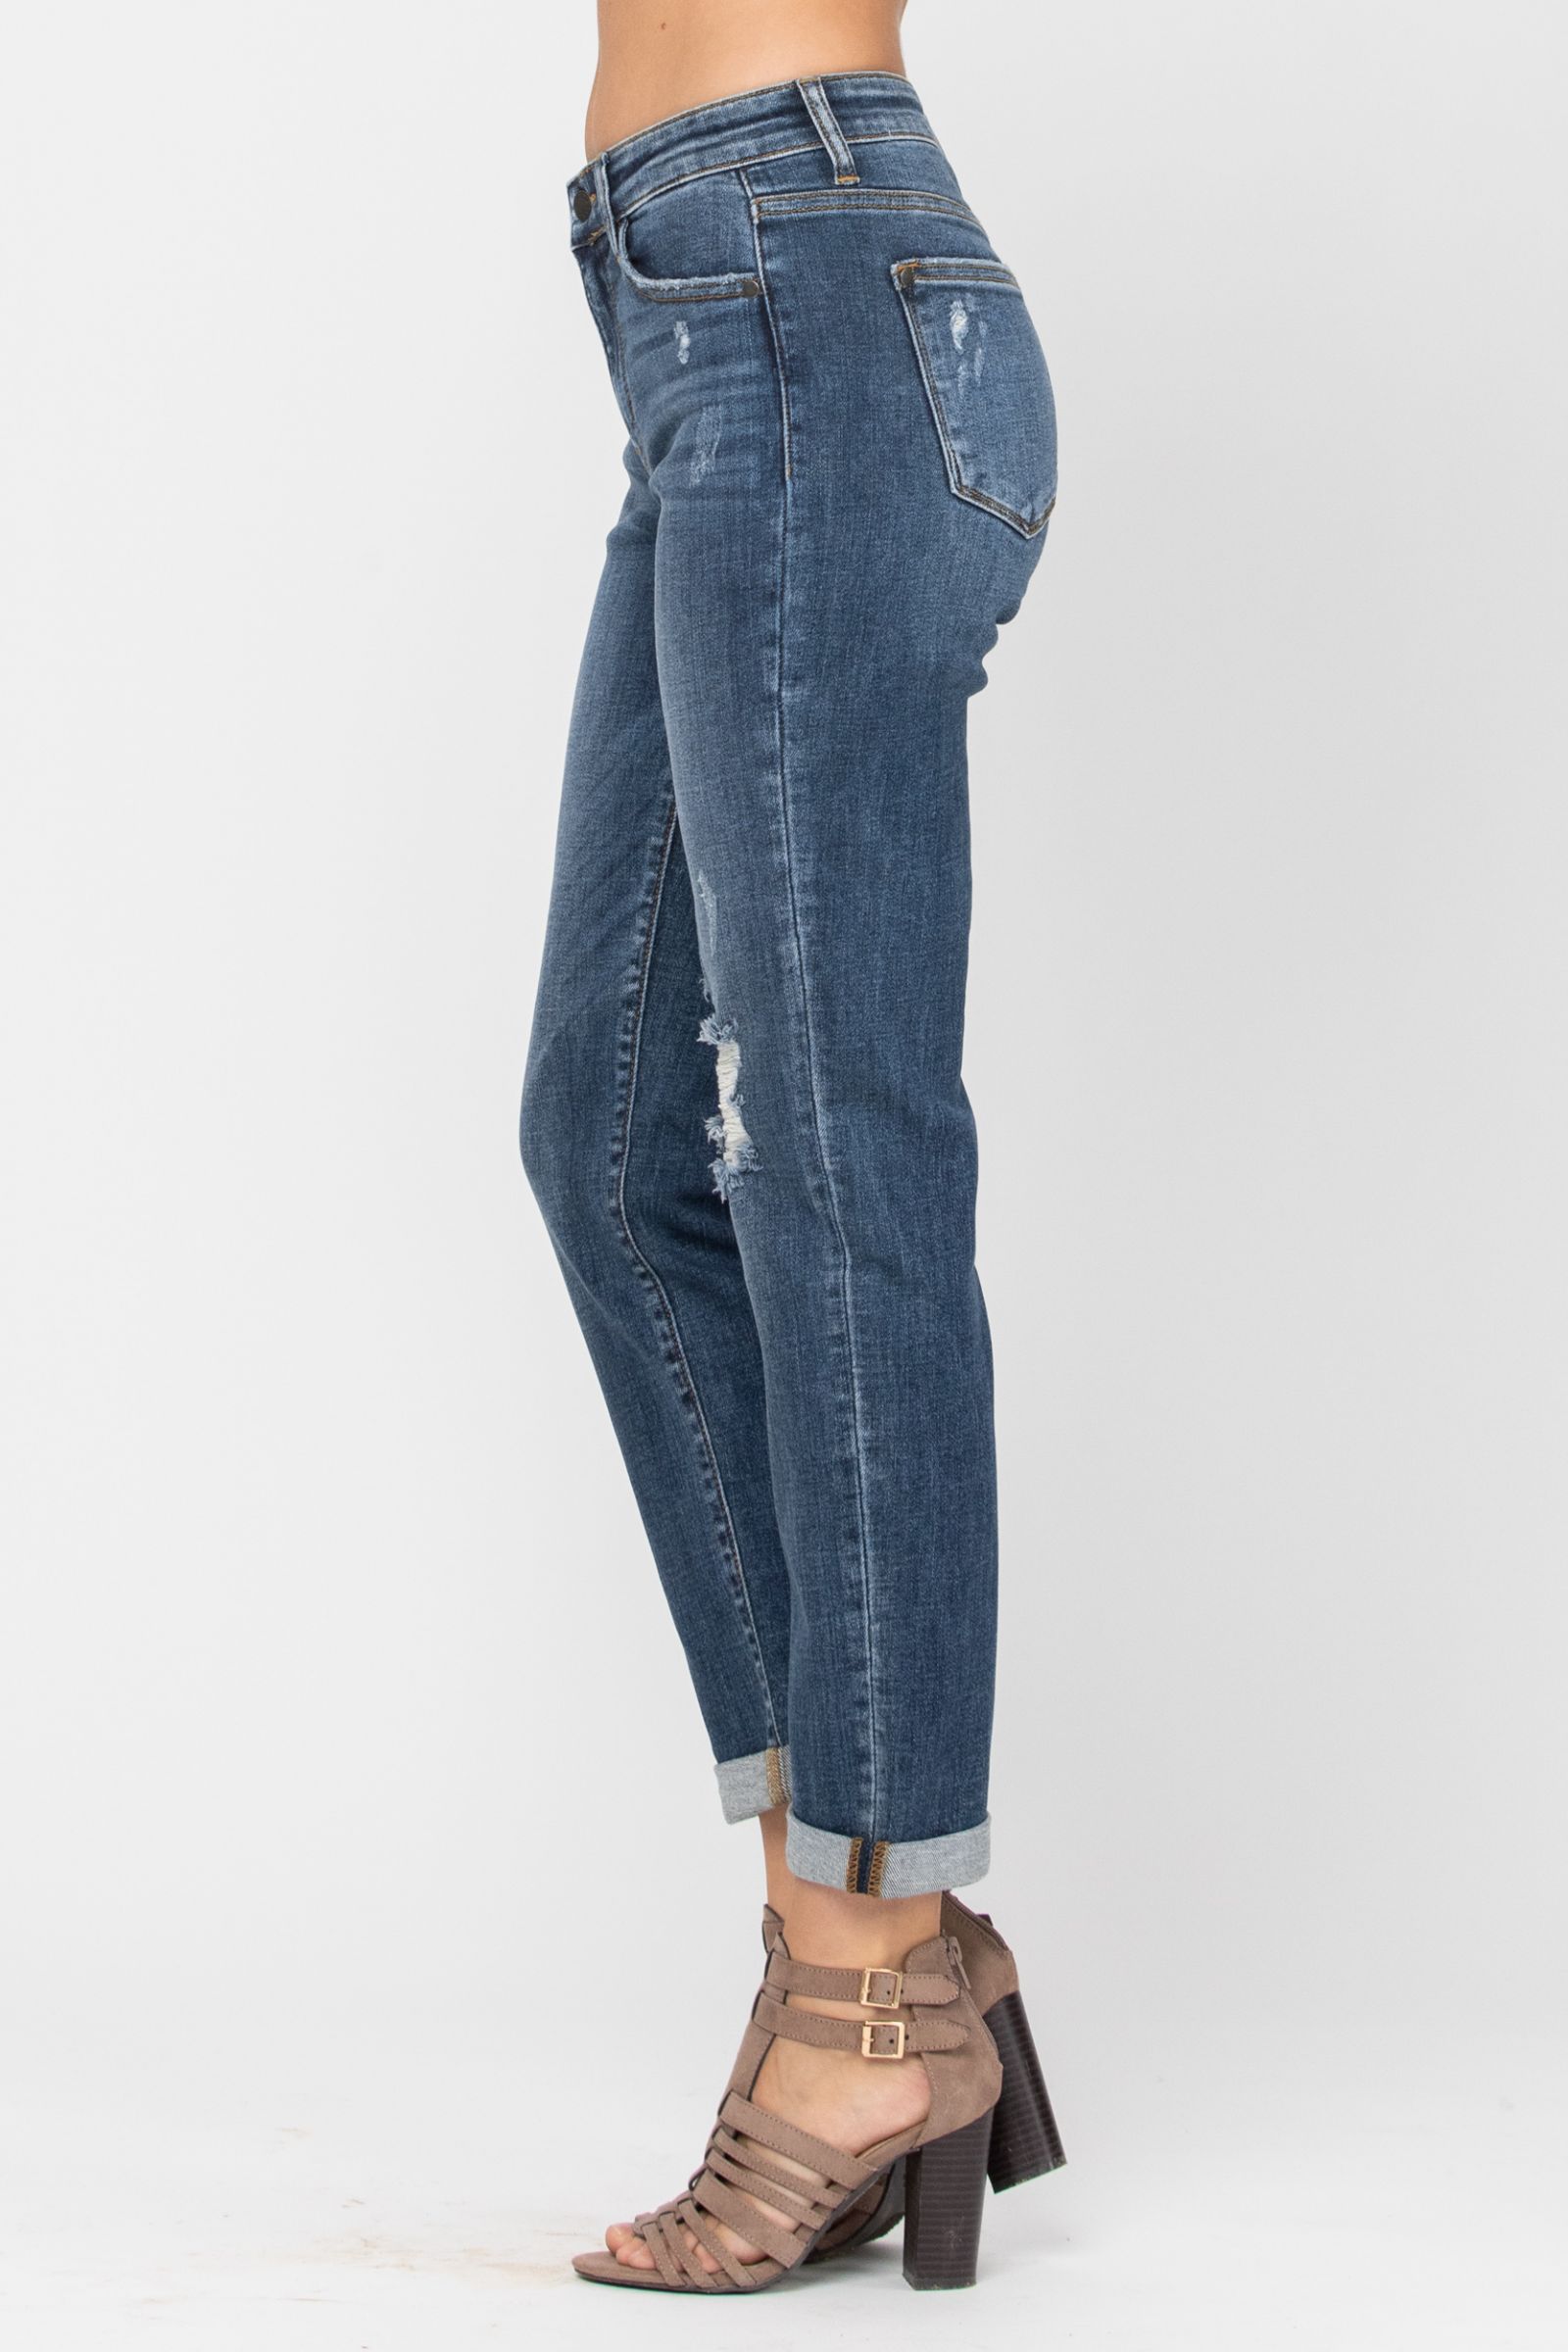 Judy Blue Mid-Rise Destroyed Girlfriend Jeans